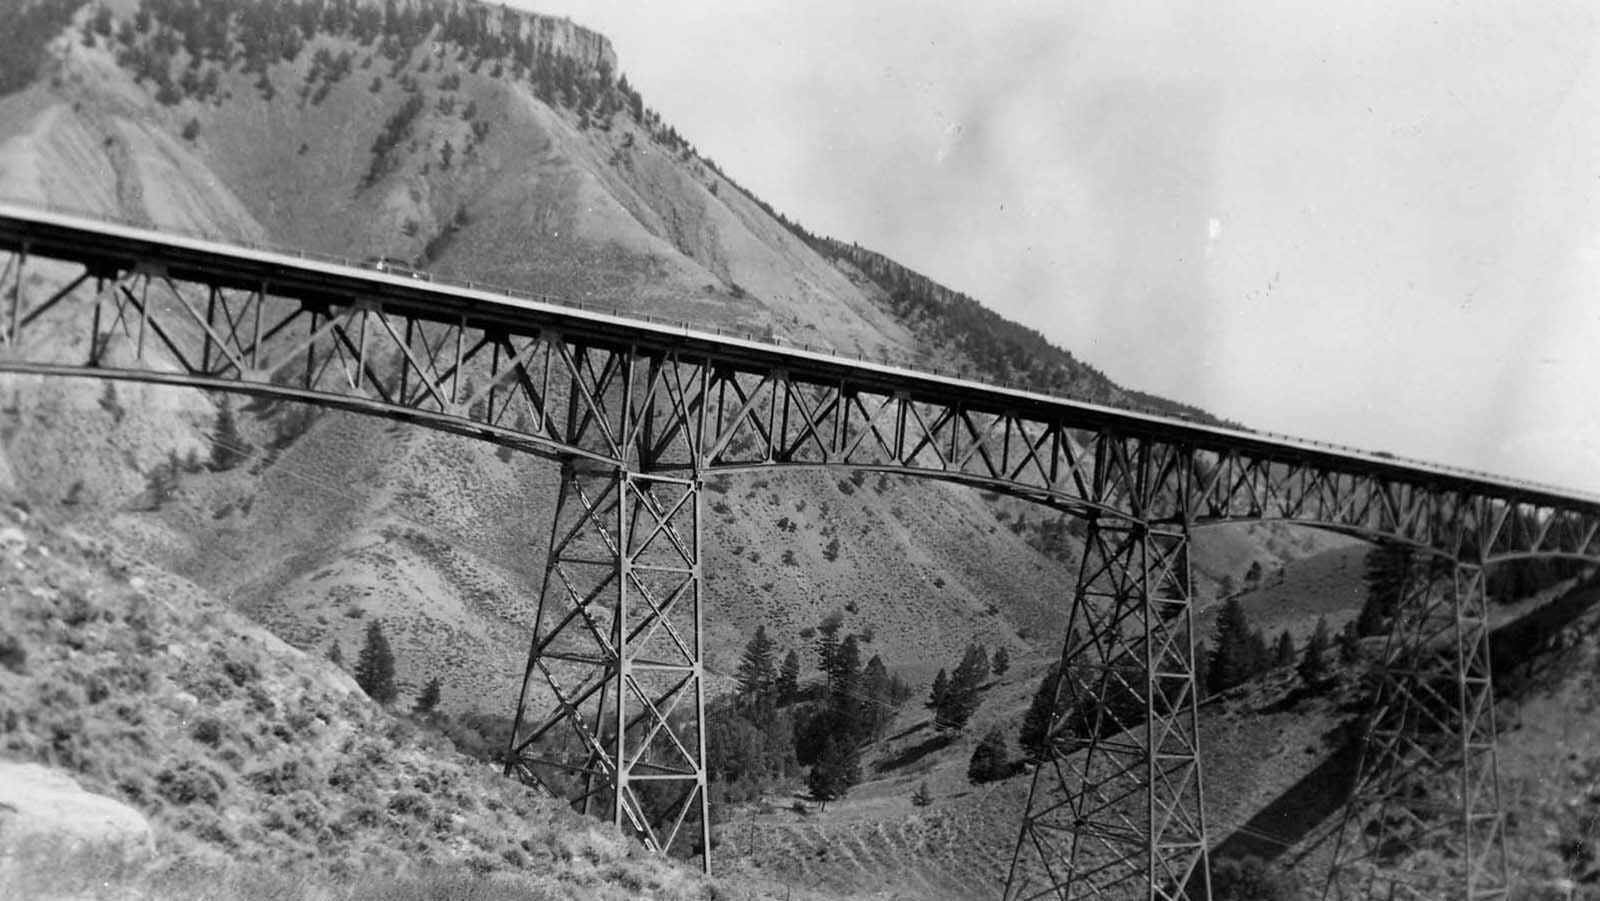 Clicking on the "Bridges of Park County" button on the historic maps page has links to historic photos of dozens of bridges, including the Gardner River Bridge in far northwest Wyoming near the Montana border.